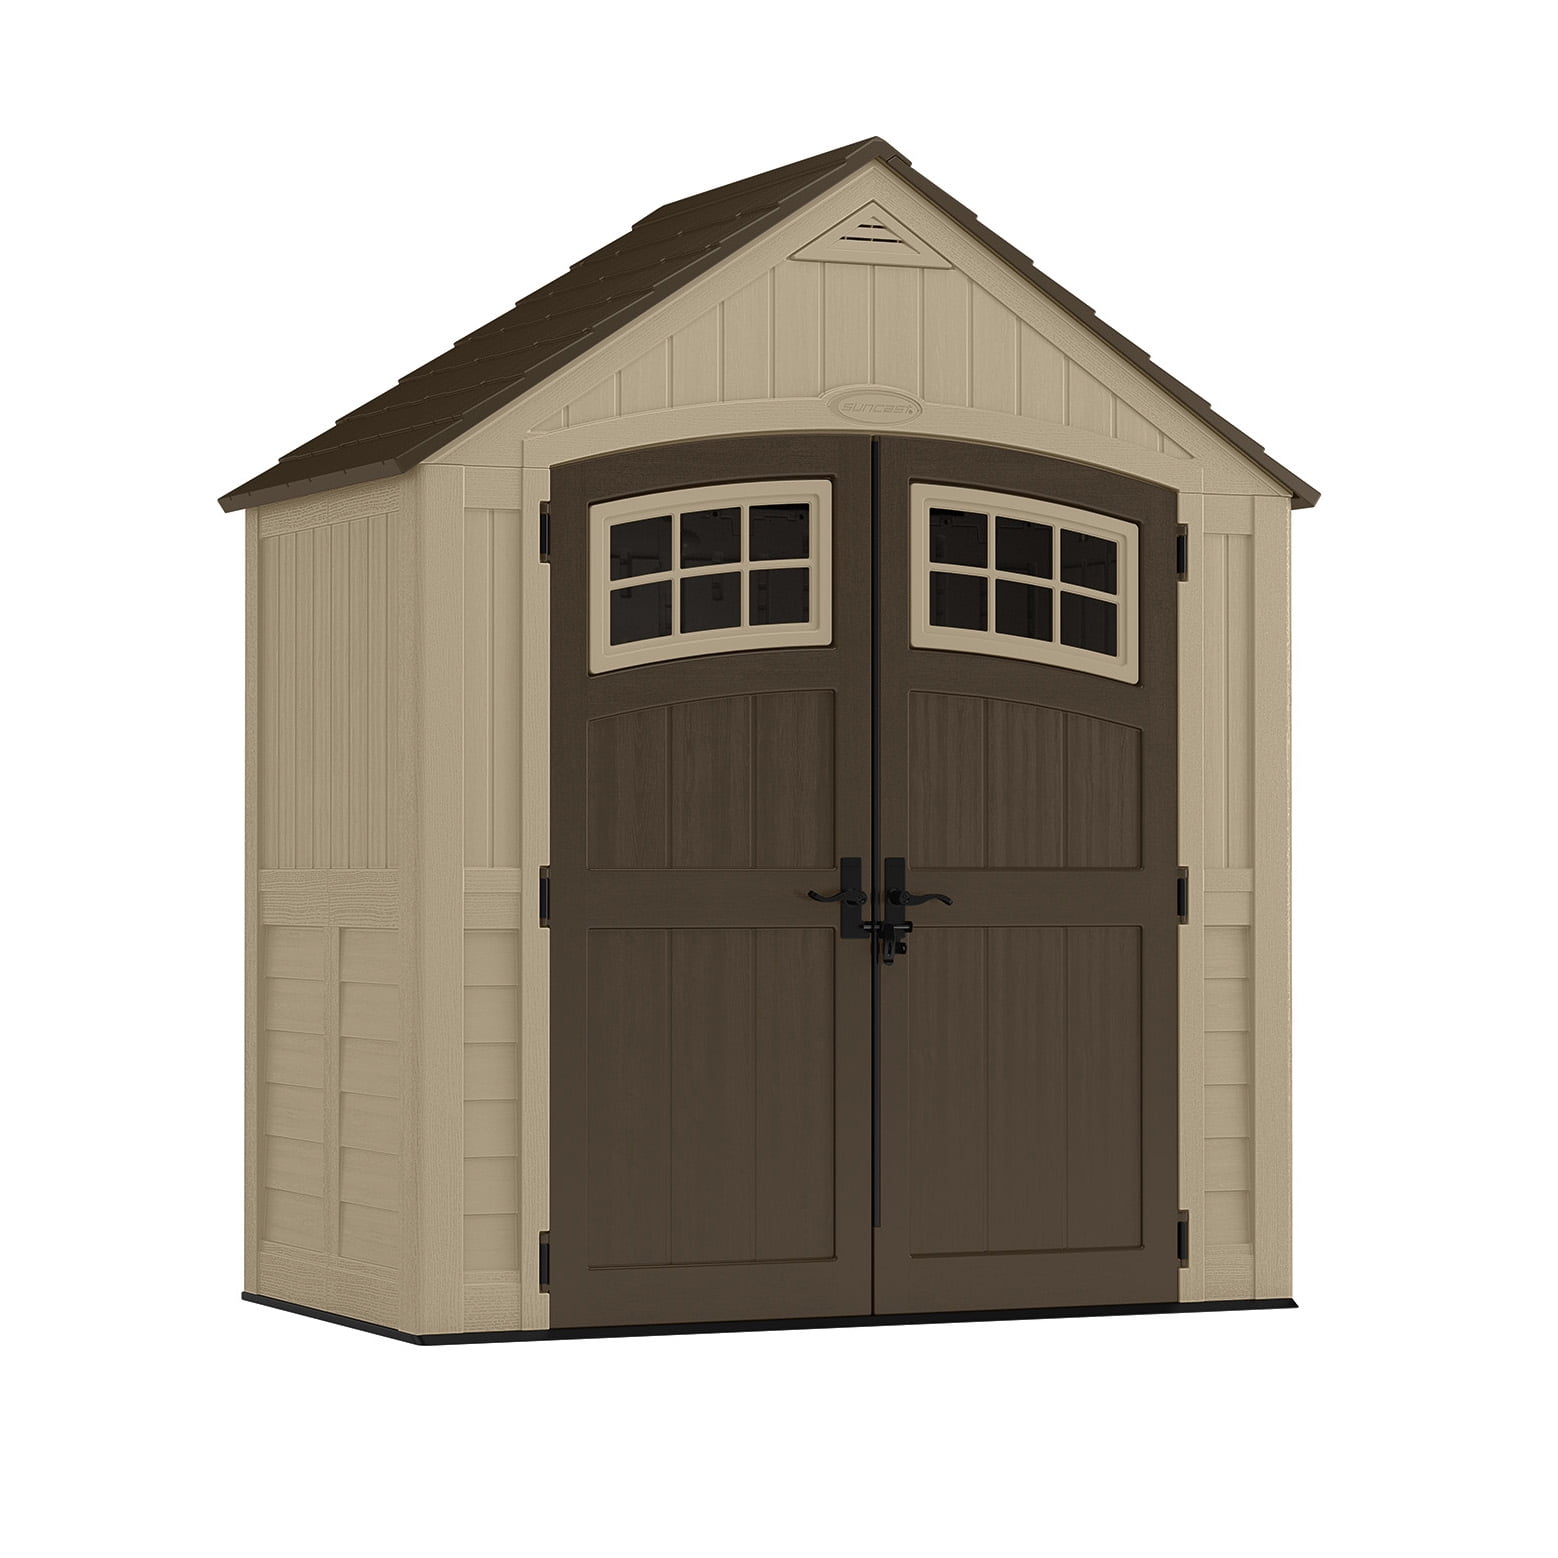 suncast sutton® storage shed for backyard, sand brown, 7